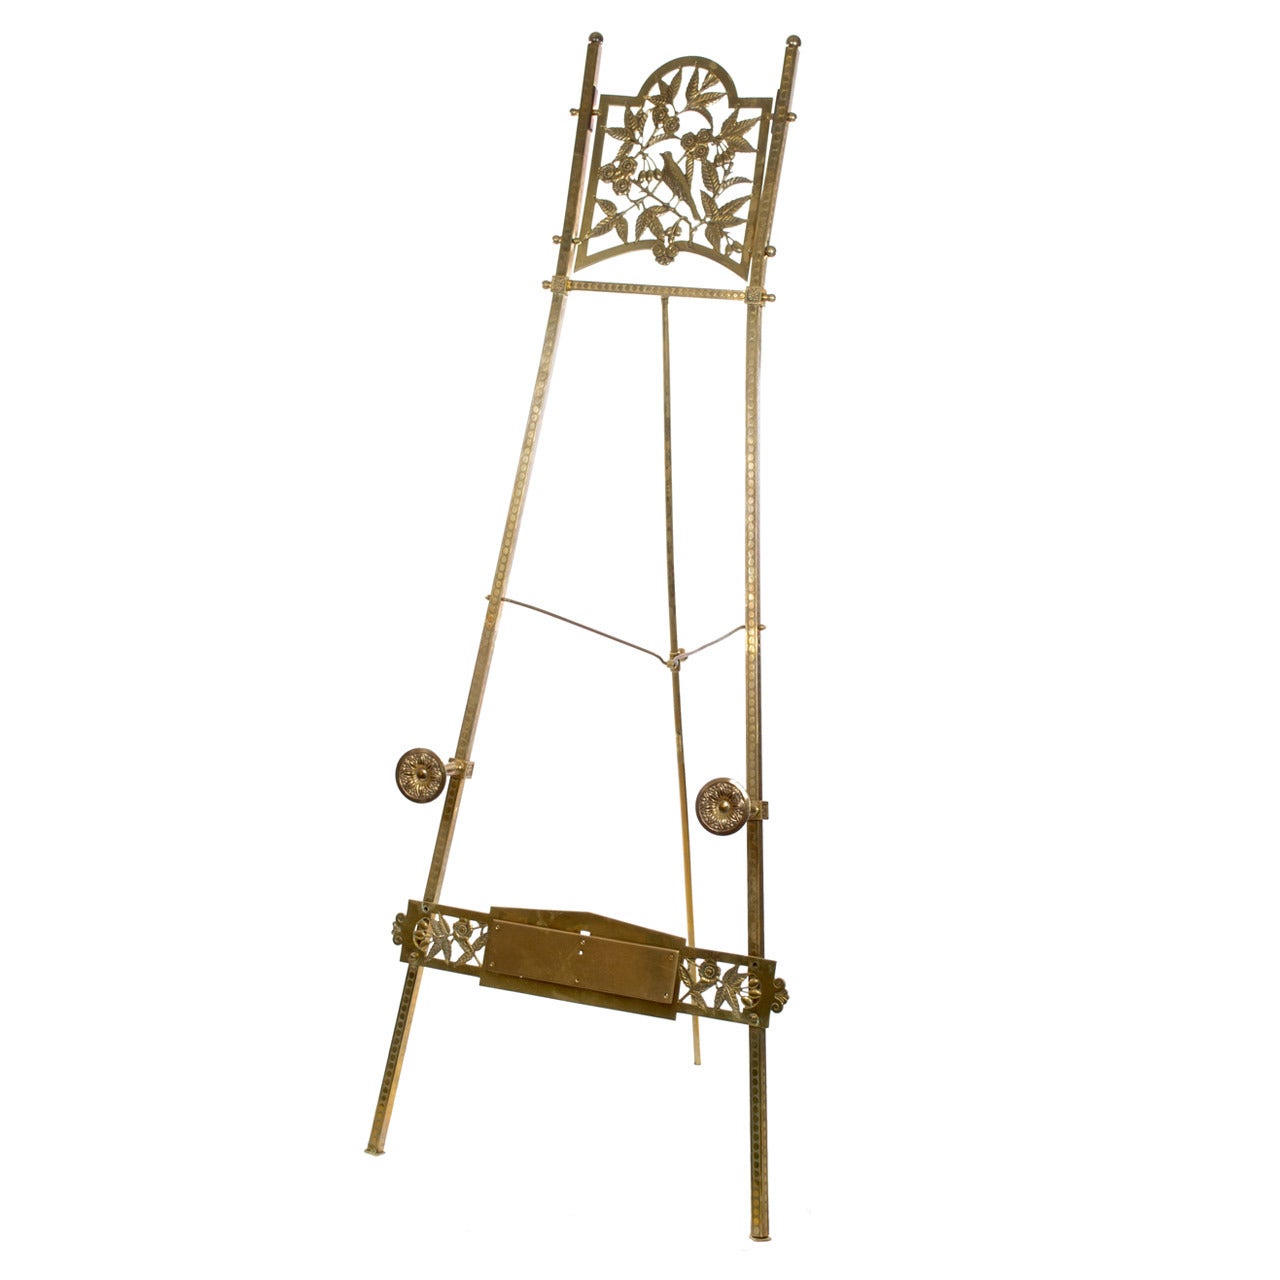 An American Aesthetic Movement Brass Easel